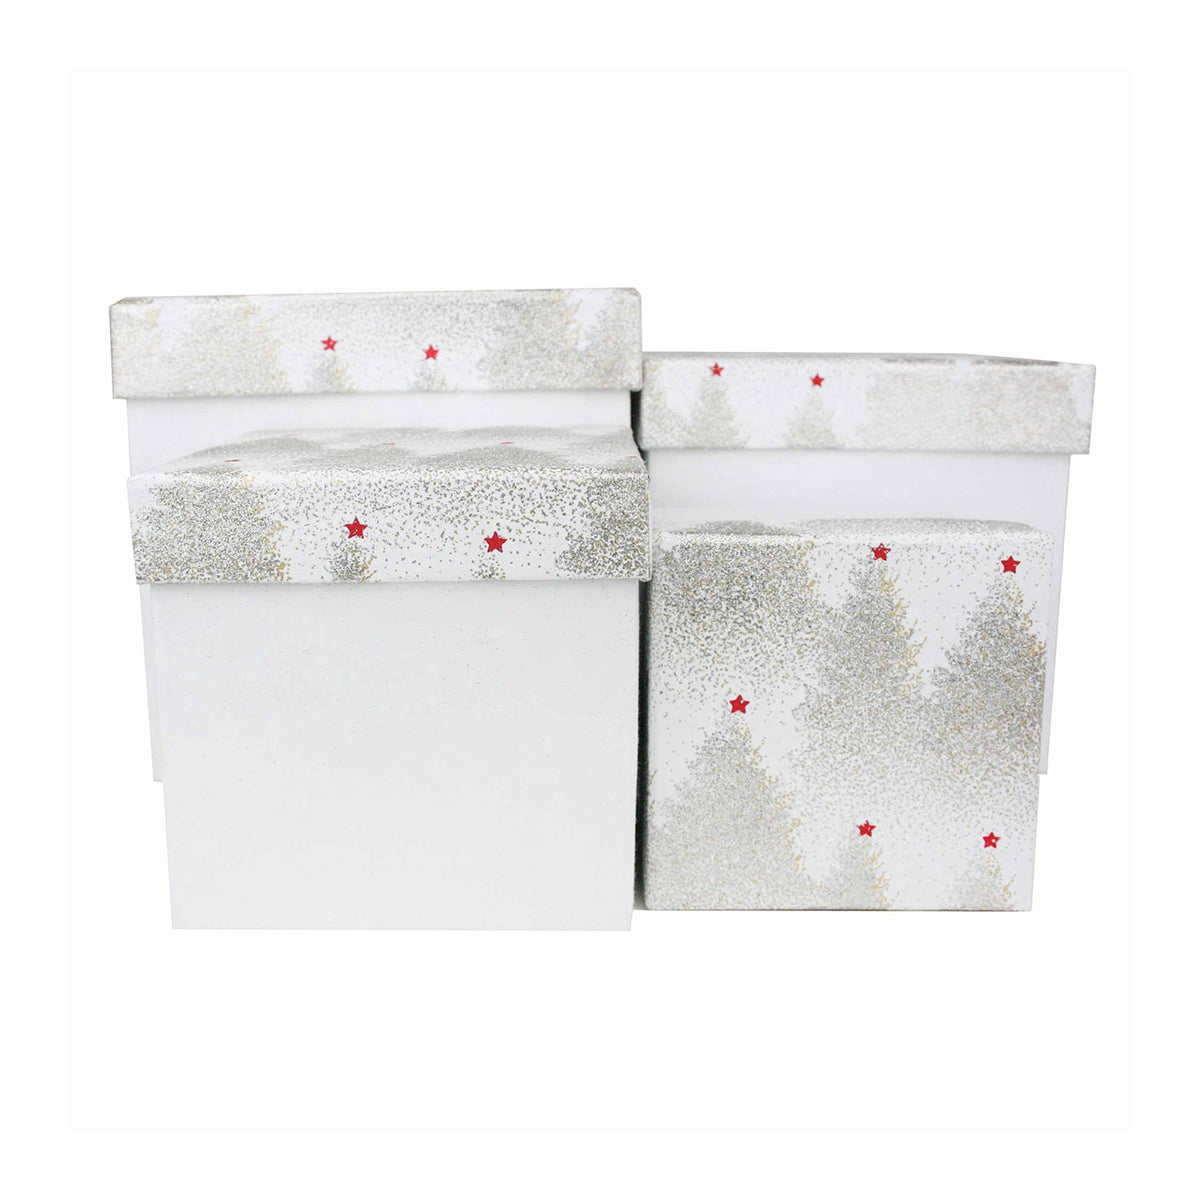 Handcrafted Glittery Winter Wonderland Gift Boxes - Set of 4